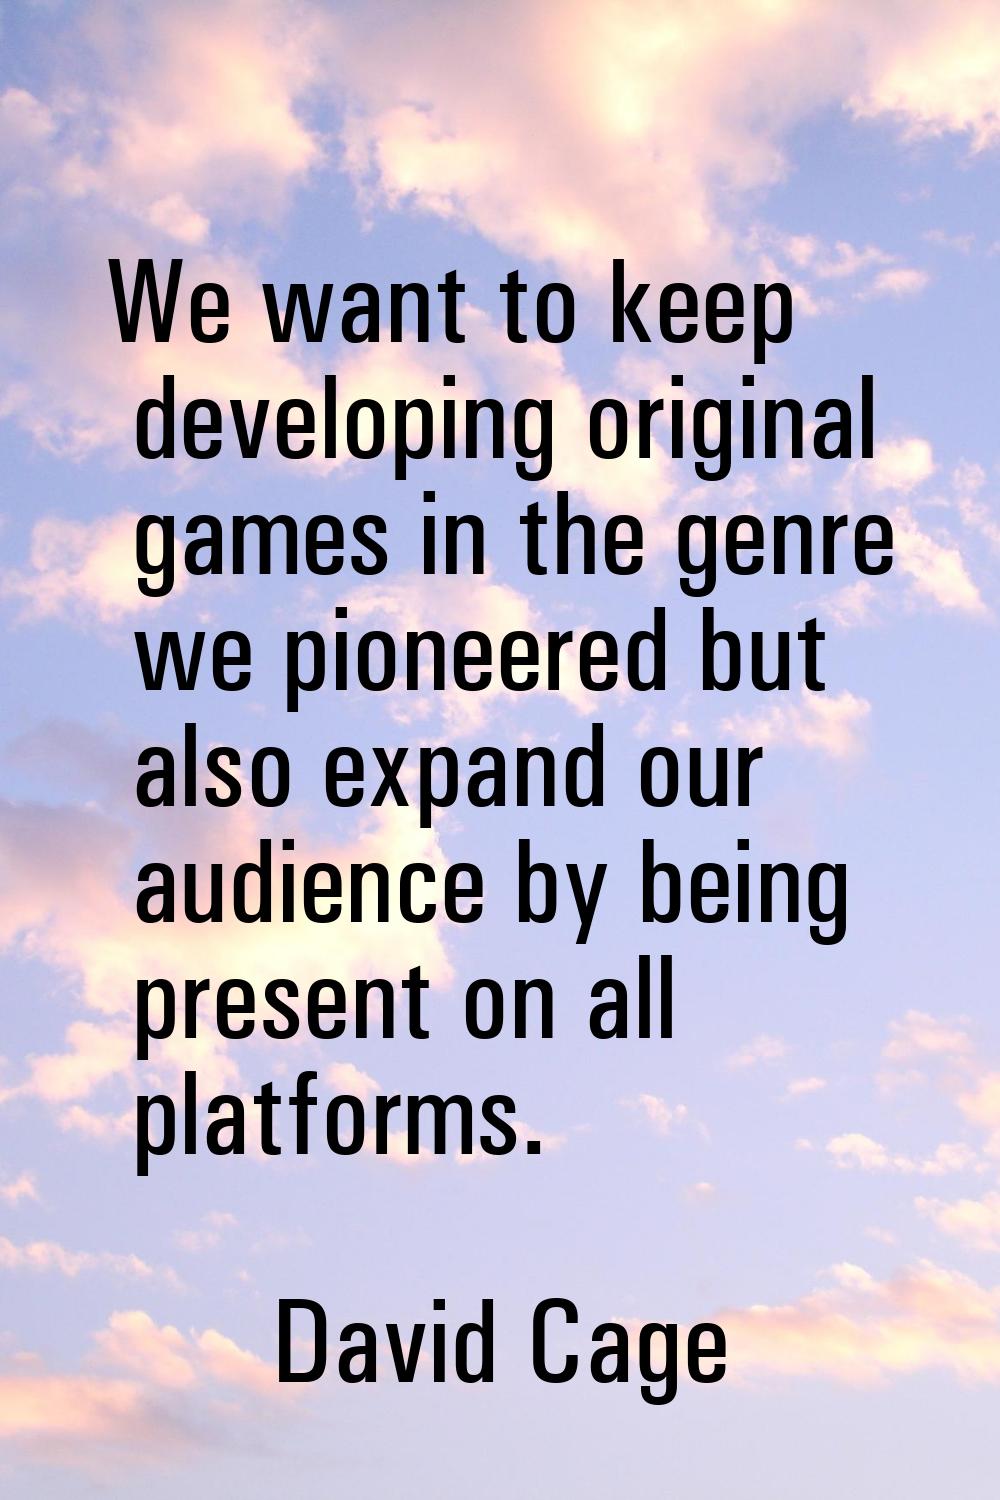 We want to keep developing original games in the genre we pioneered but also expand our audience by